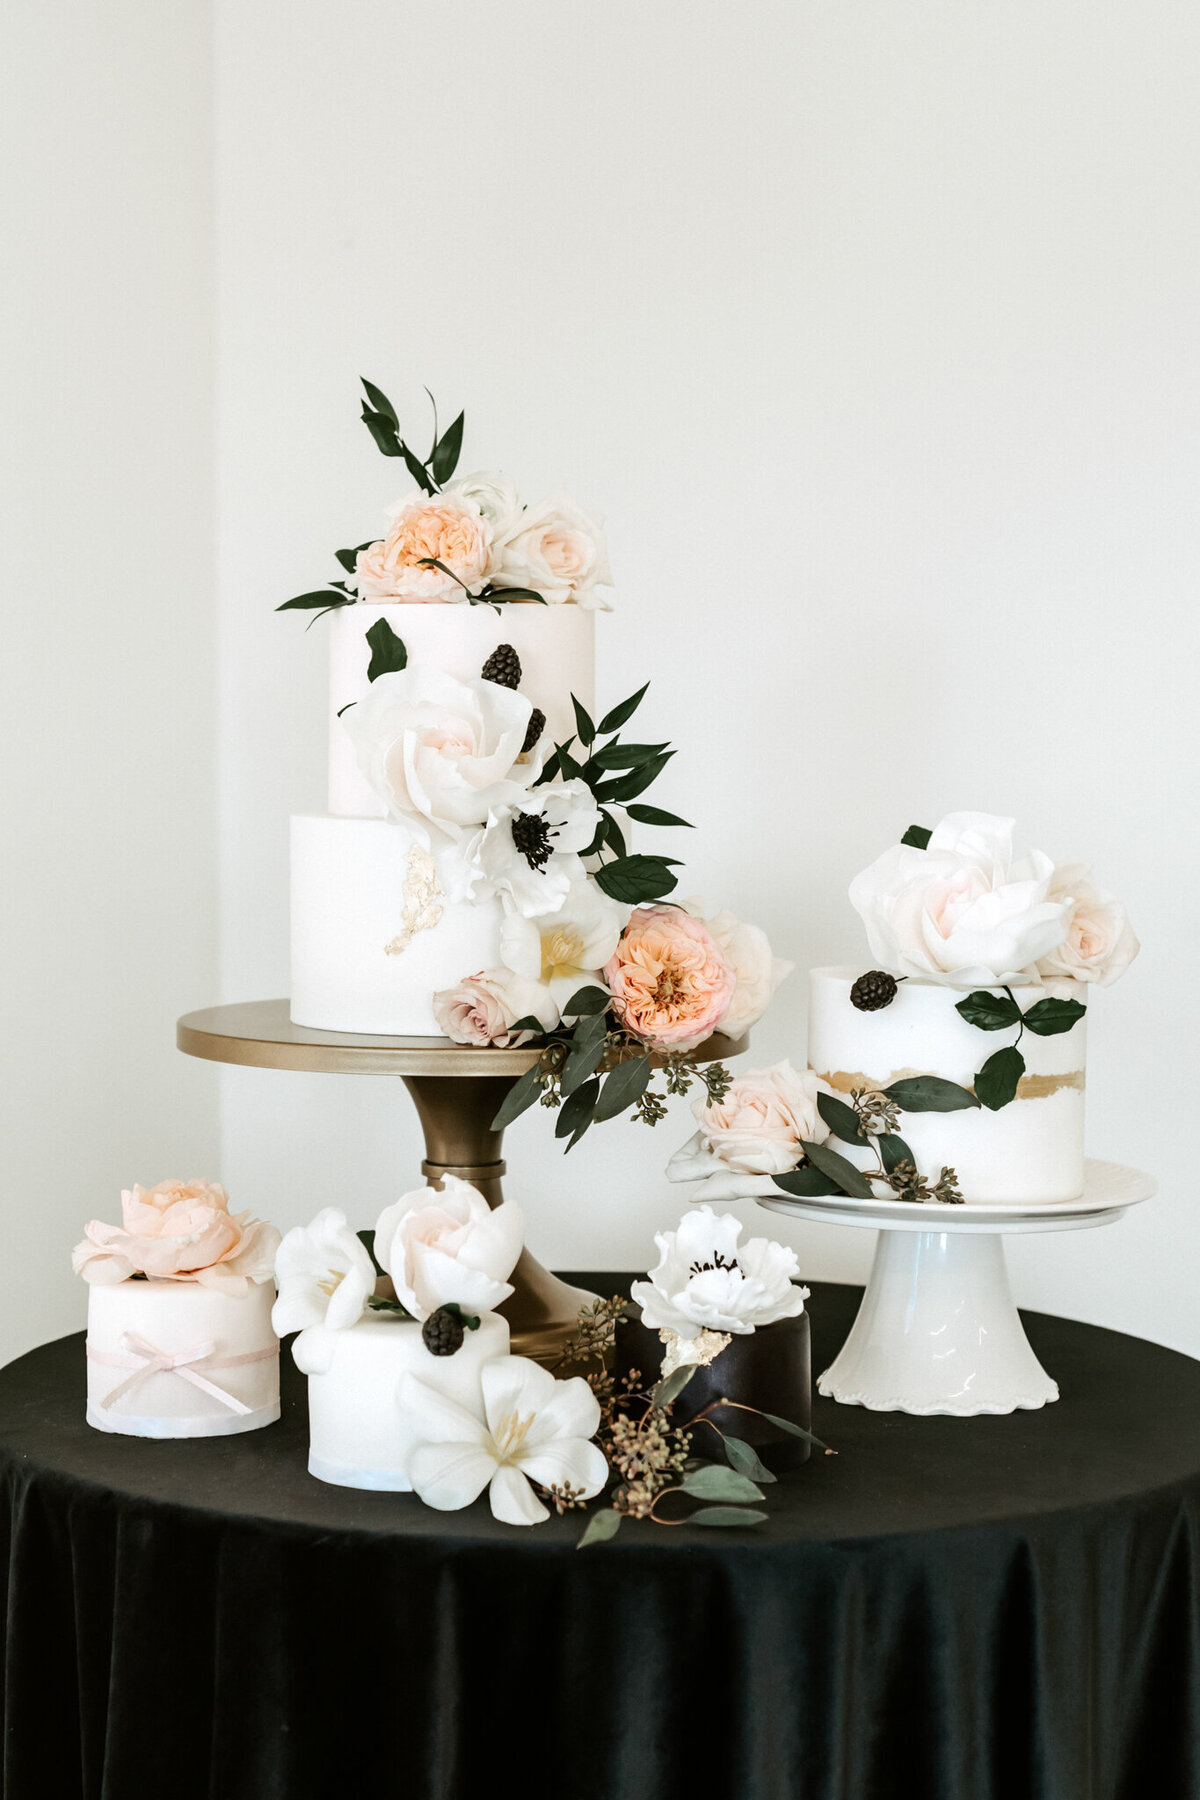 Simple and elegant white wedding cake, with gold details, pink and white florals, and greenery, by Yvonne's Delightful Cakes, classic cakes & desserts in Calgary, Alberta, featured on the Brontë Bride Vendor Guide.